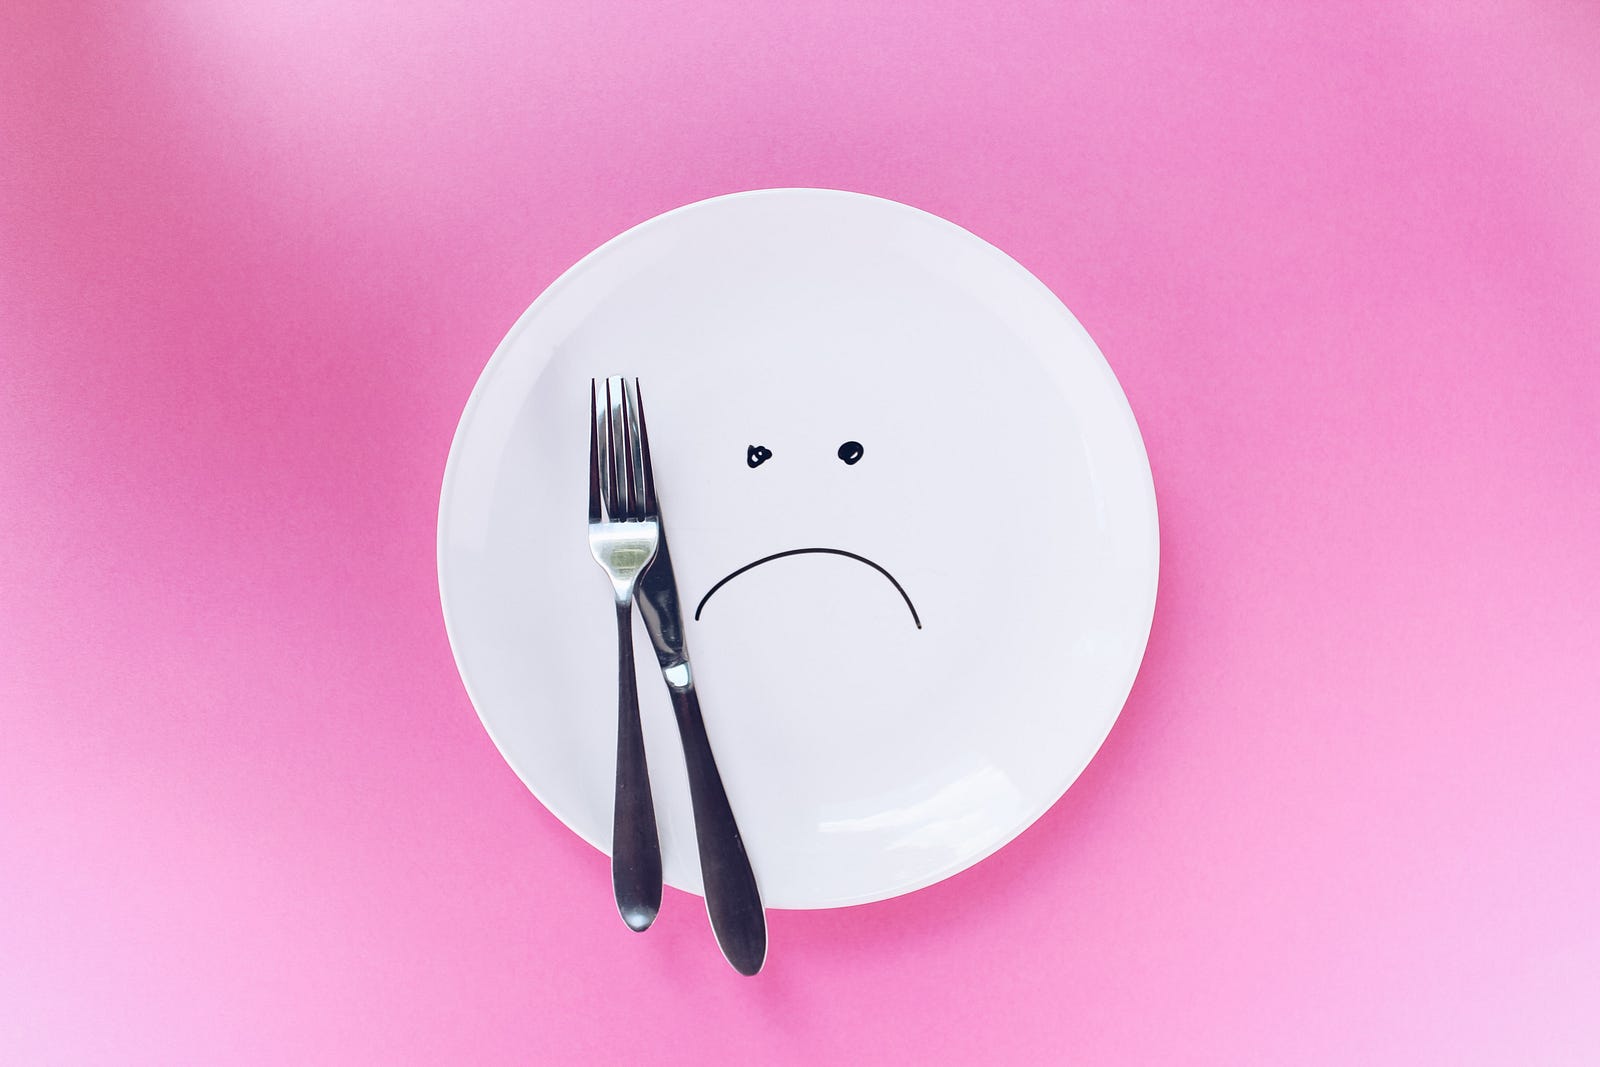 An empty white plate, with a sad face drawn on it. A fork and knife are perched on its left side. There is a pink background. Periodic fasting is usually practiced far less frequently than intermittent fasting (rarely more than once every two weeks) and is sometimes carried out on an “as needed” basis rather than at specific intervals.